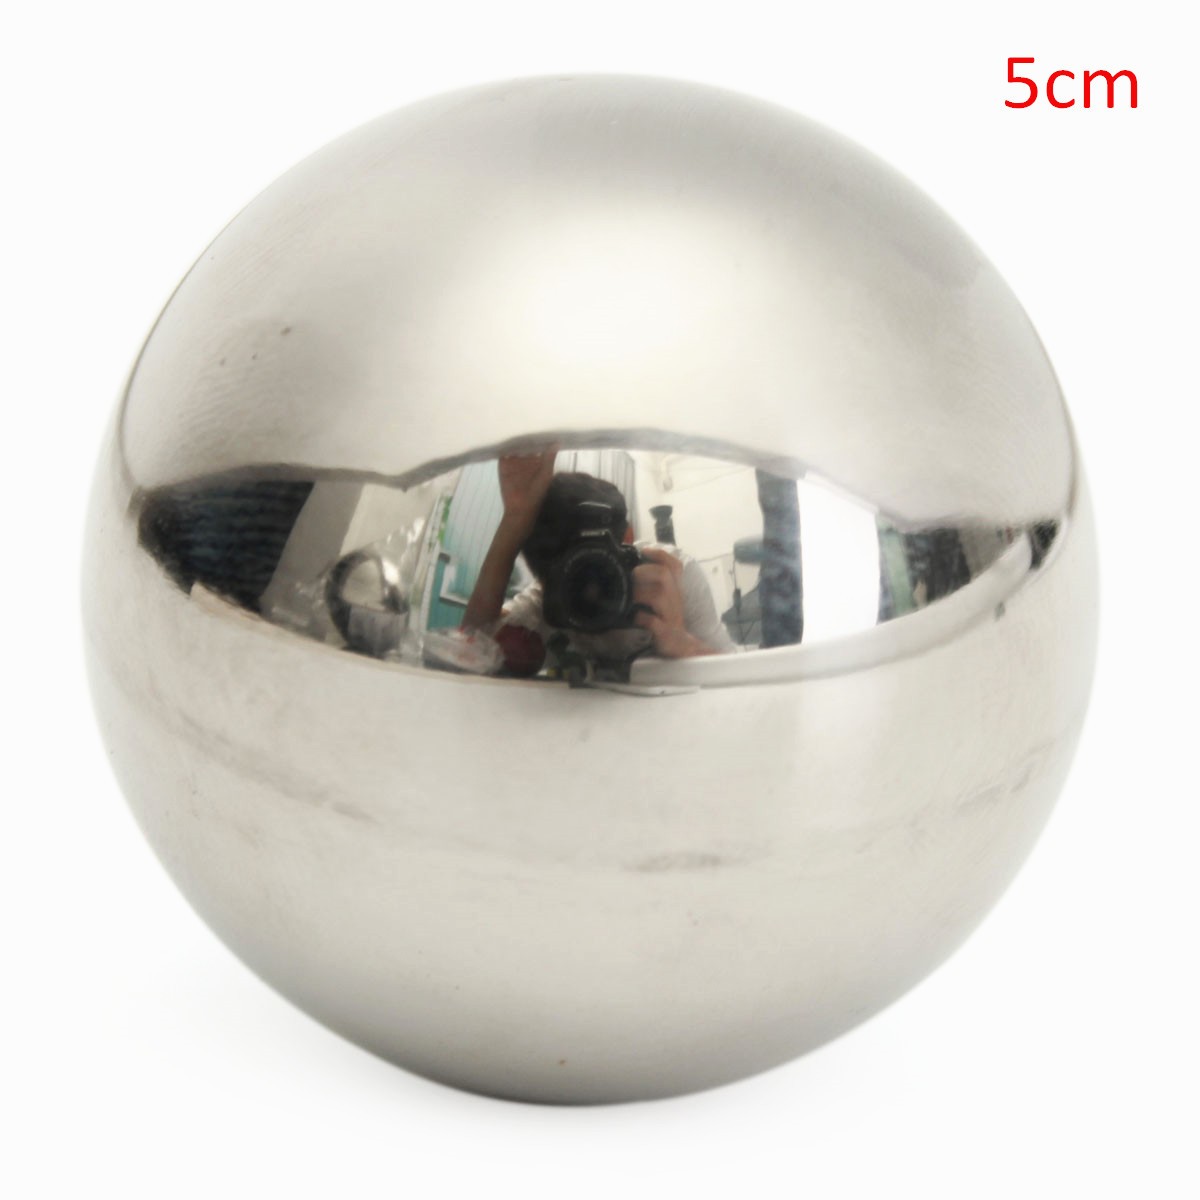 Stainless-Steel-Mirror-Ball-Polished-Hollow-Ball-Hardware-Accessories-58101215cm-1050679